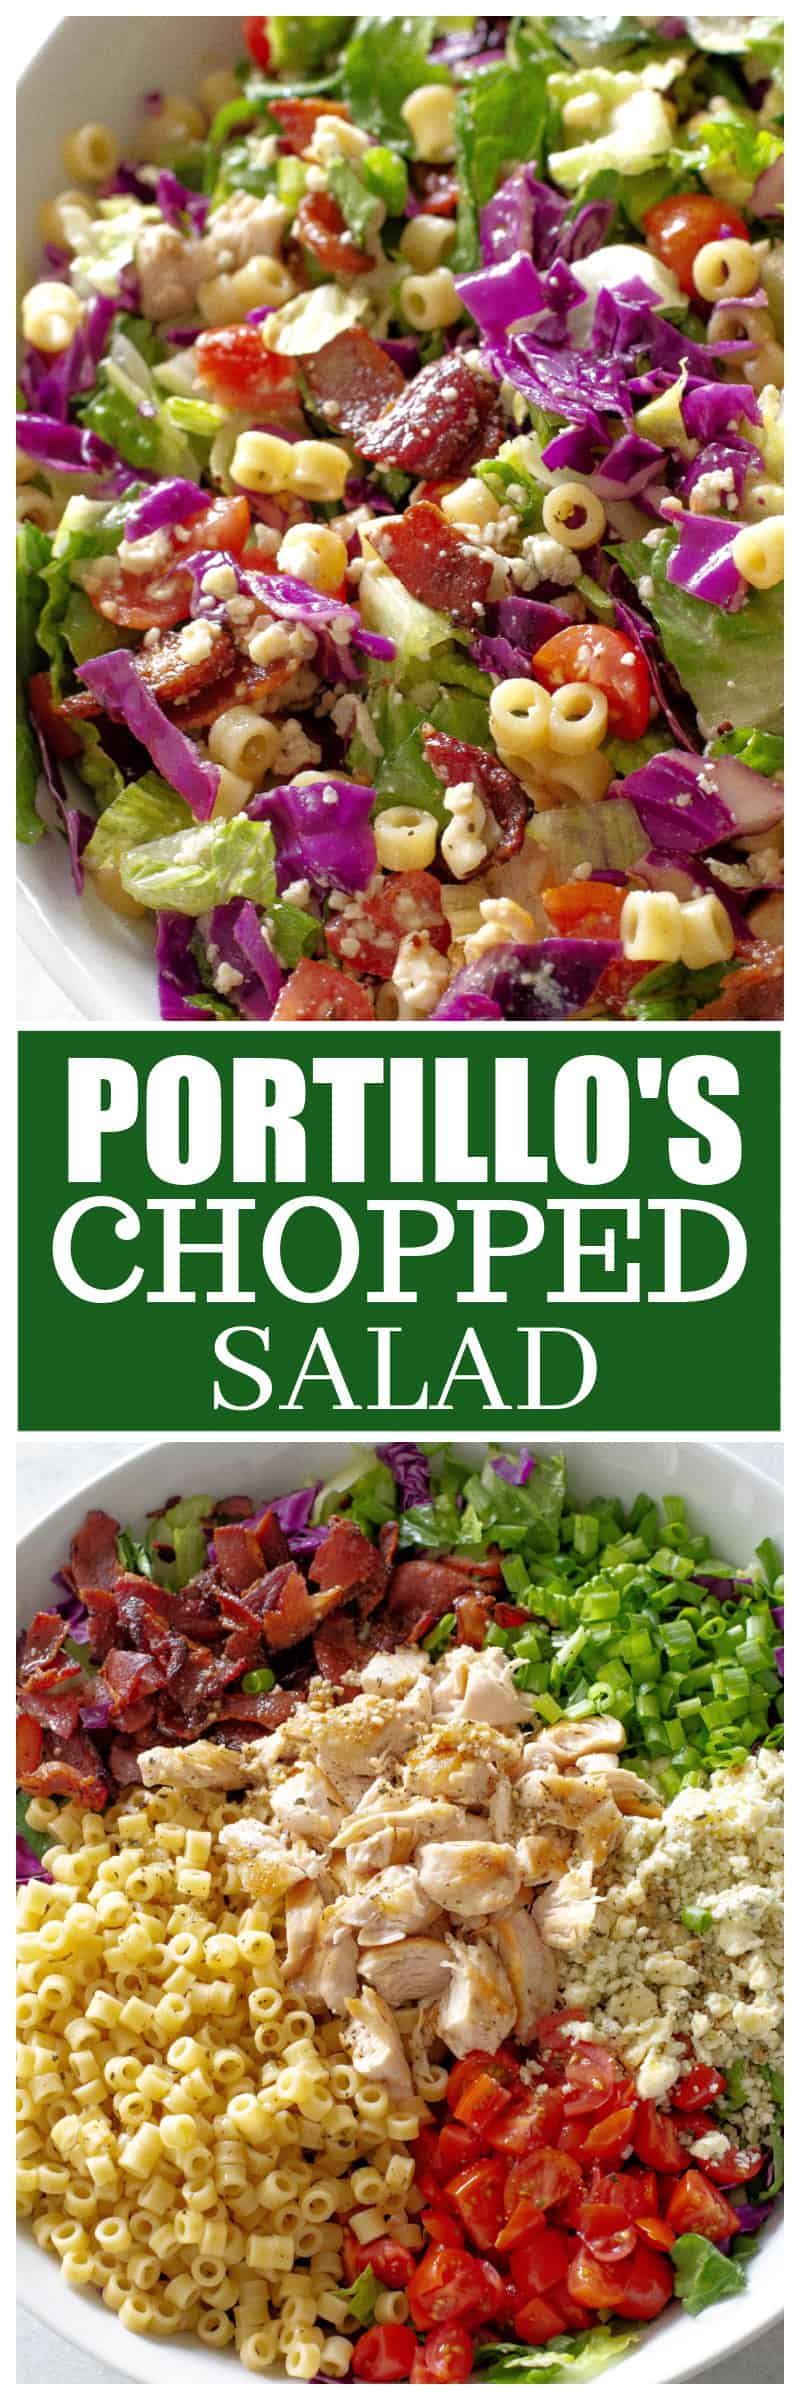 Portillo's Chopped Salad Recipe - Cooking During Stolen Moments